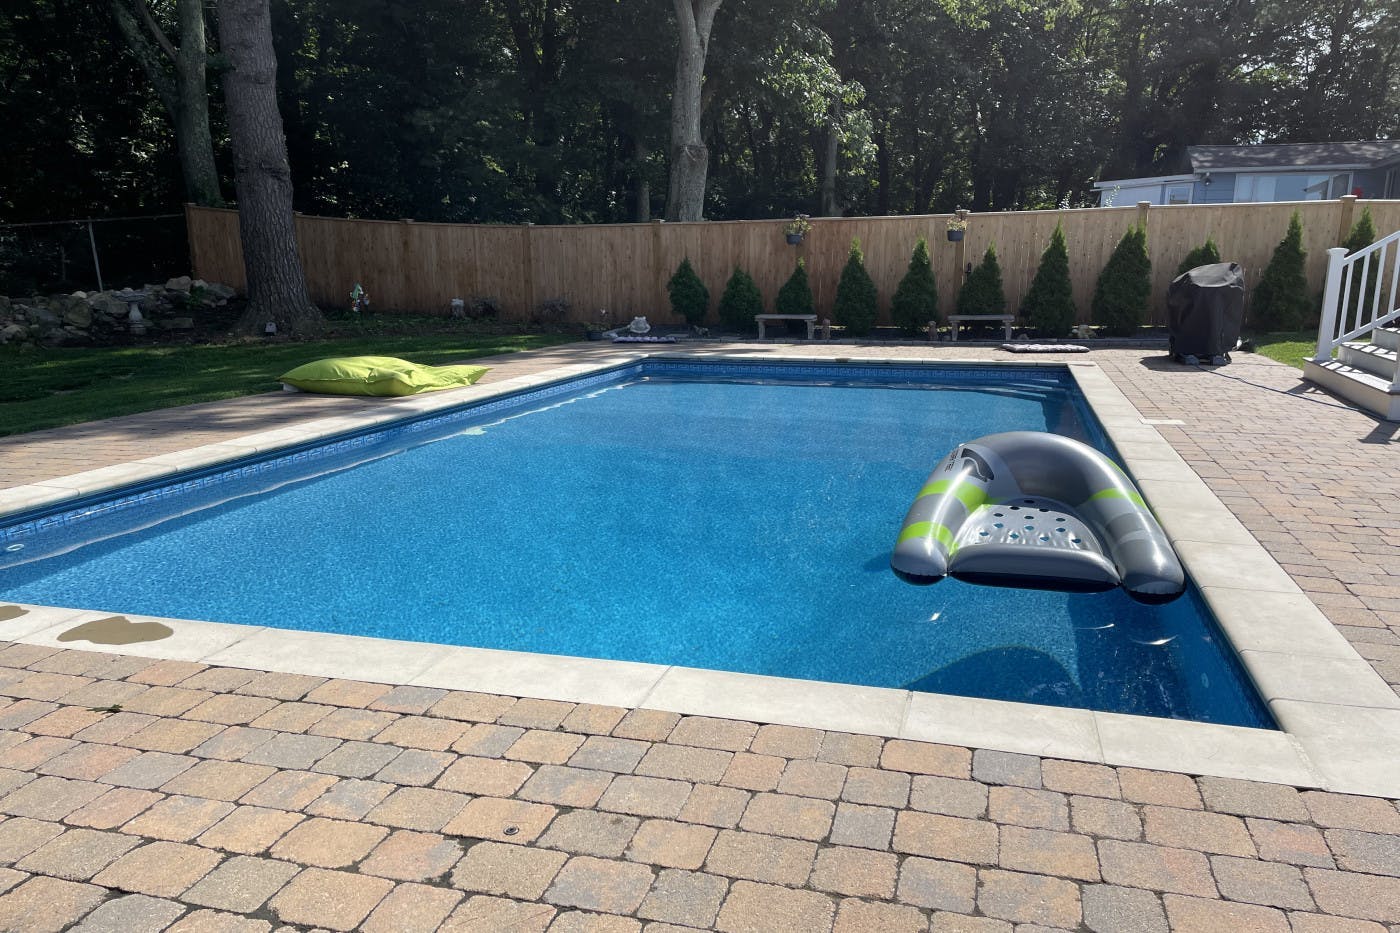 80-degree Pool w/ Golfcourse View (by Rt1)